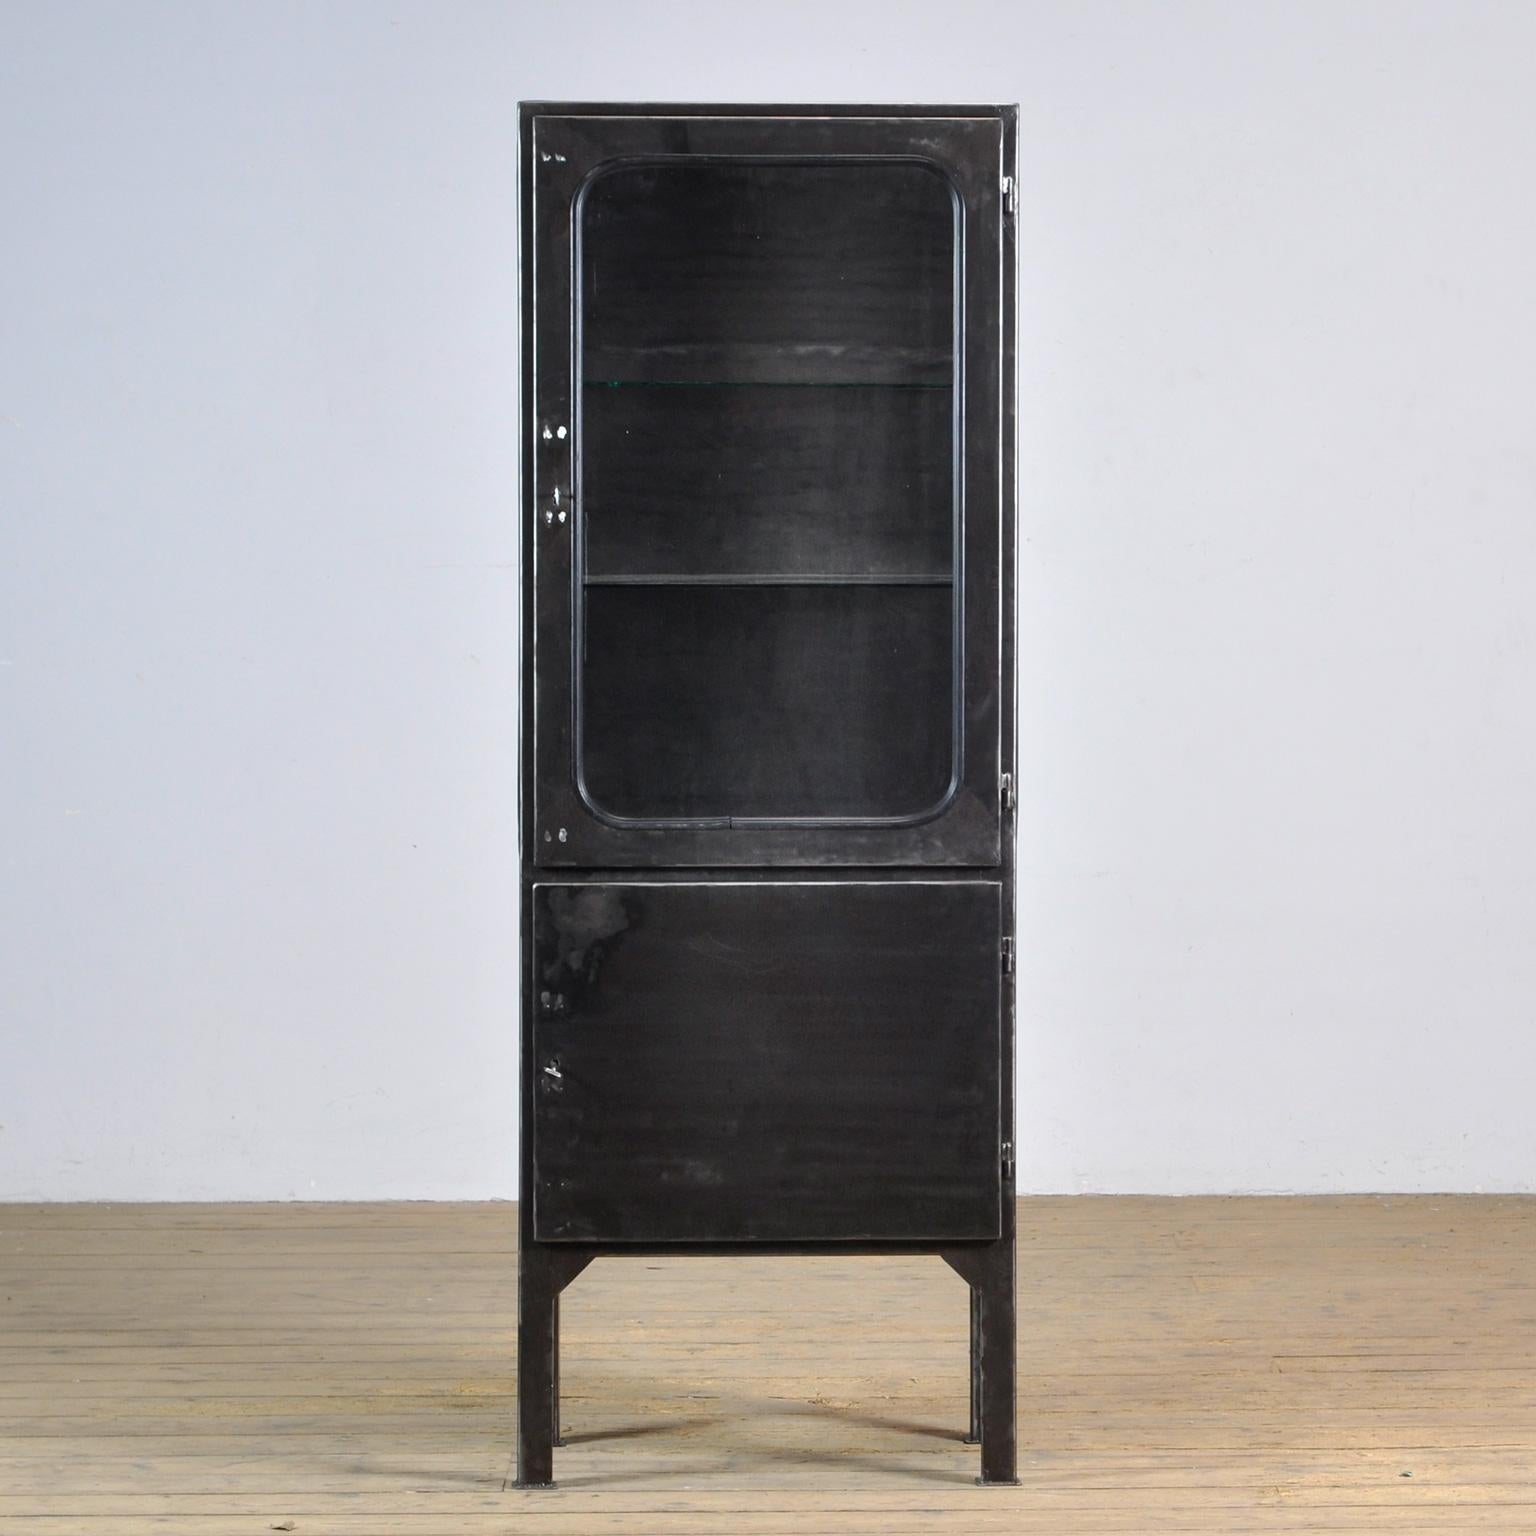 Made of steel and glass that is clamped in the steel by a rubber strip. The cabinet is from the 1970s and was produced in Hungary. The case has been stripped to the metal and finished with a transparent lacquer. The cabinet comes with 2 glass